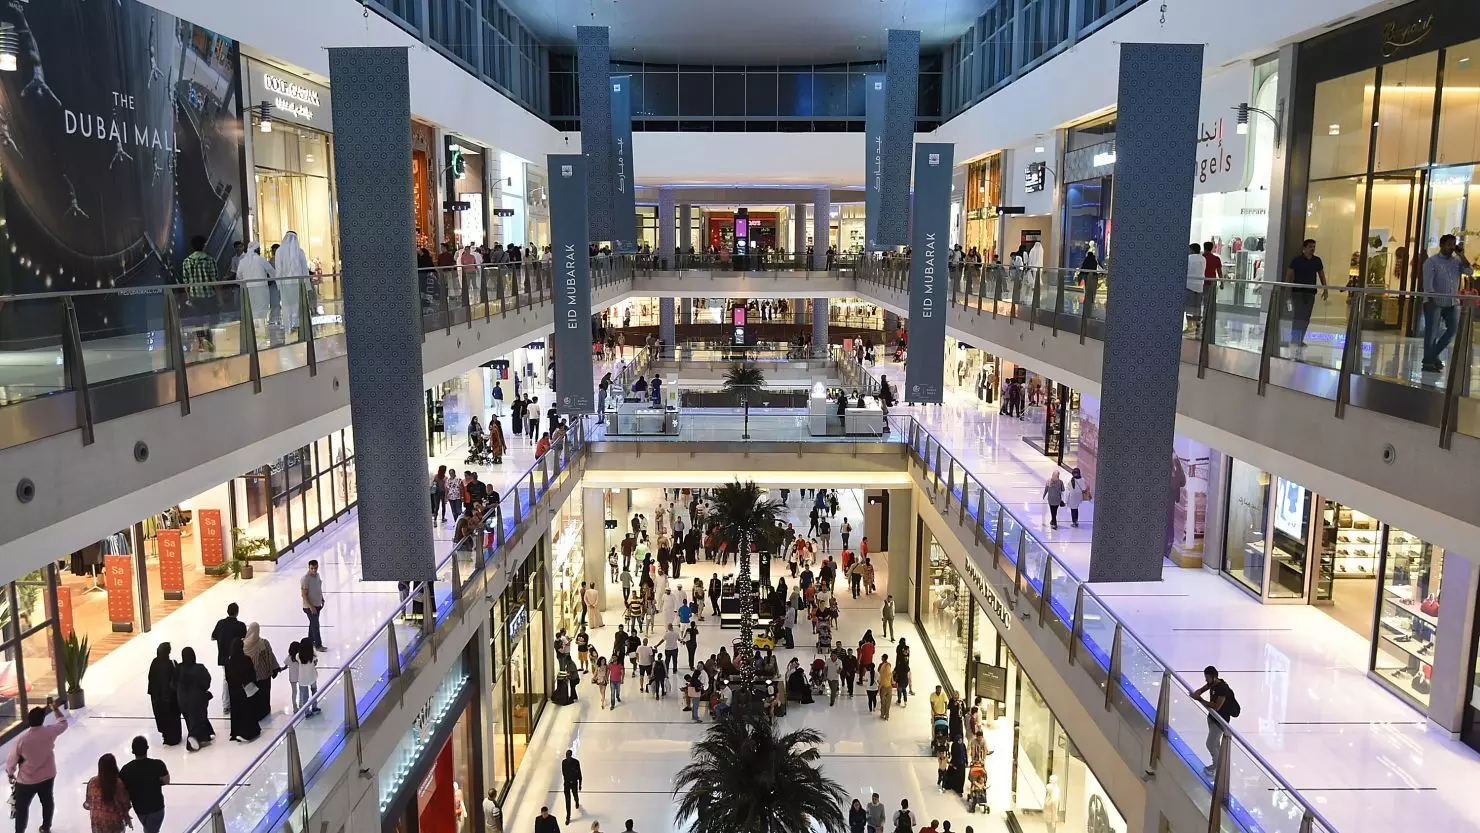 Dubai super sale offers 90% discounts this weekend